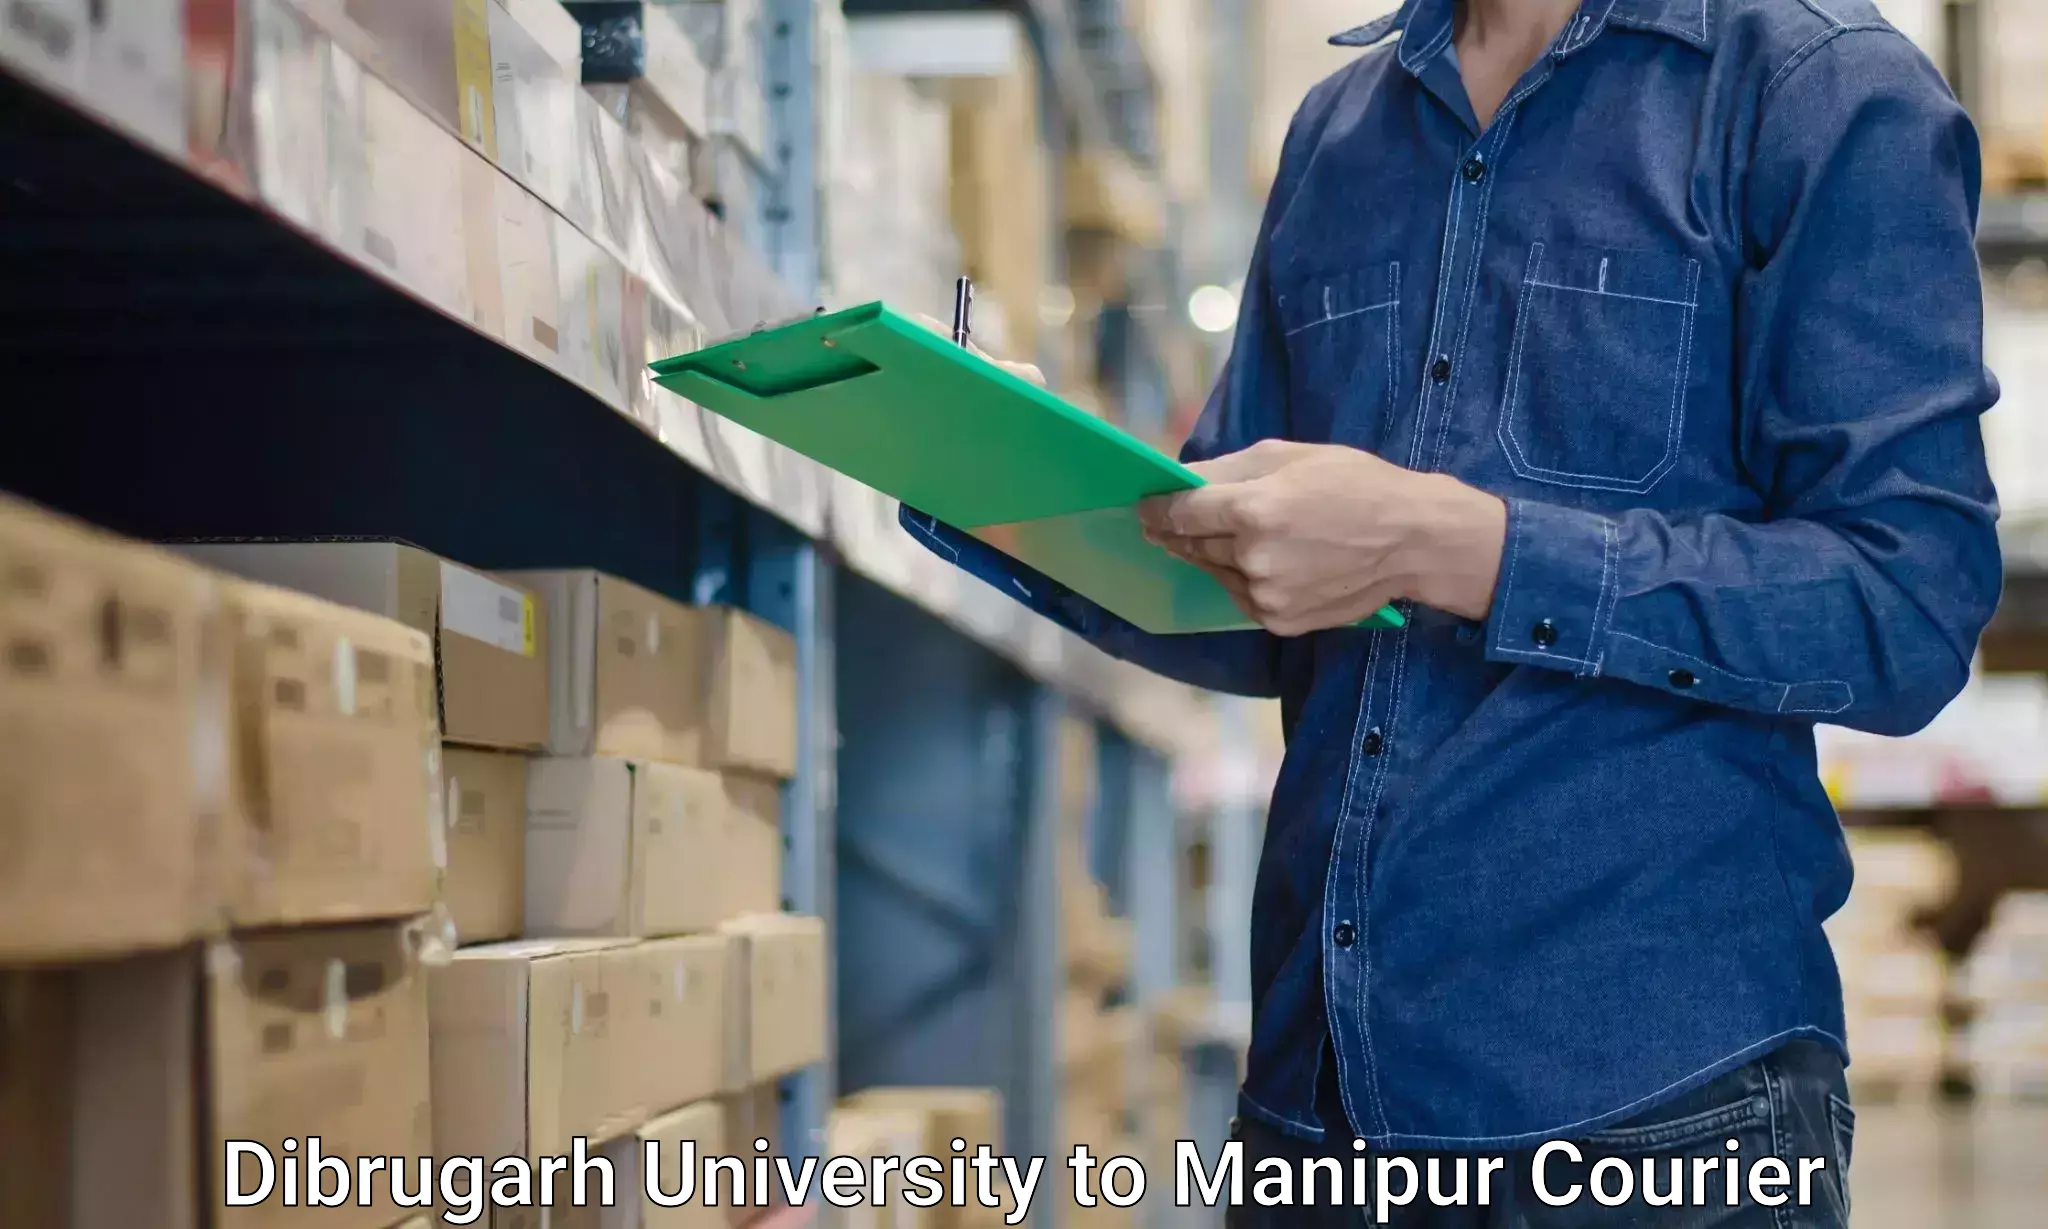 Efficient packing and moving Dibrugarh University to Tamenglong